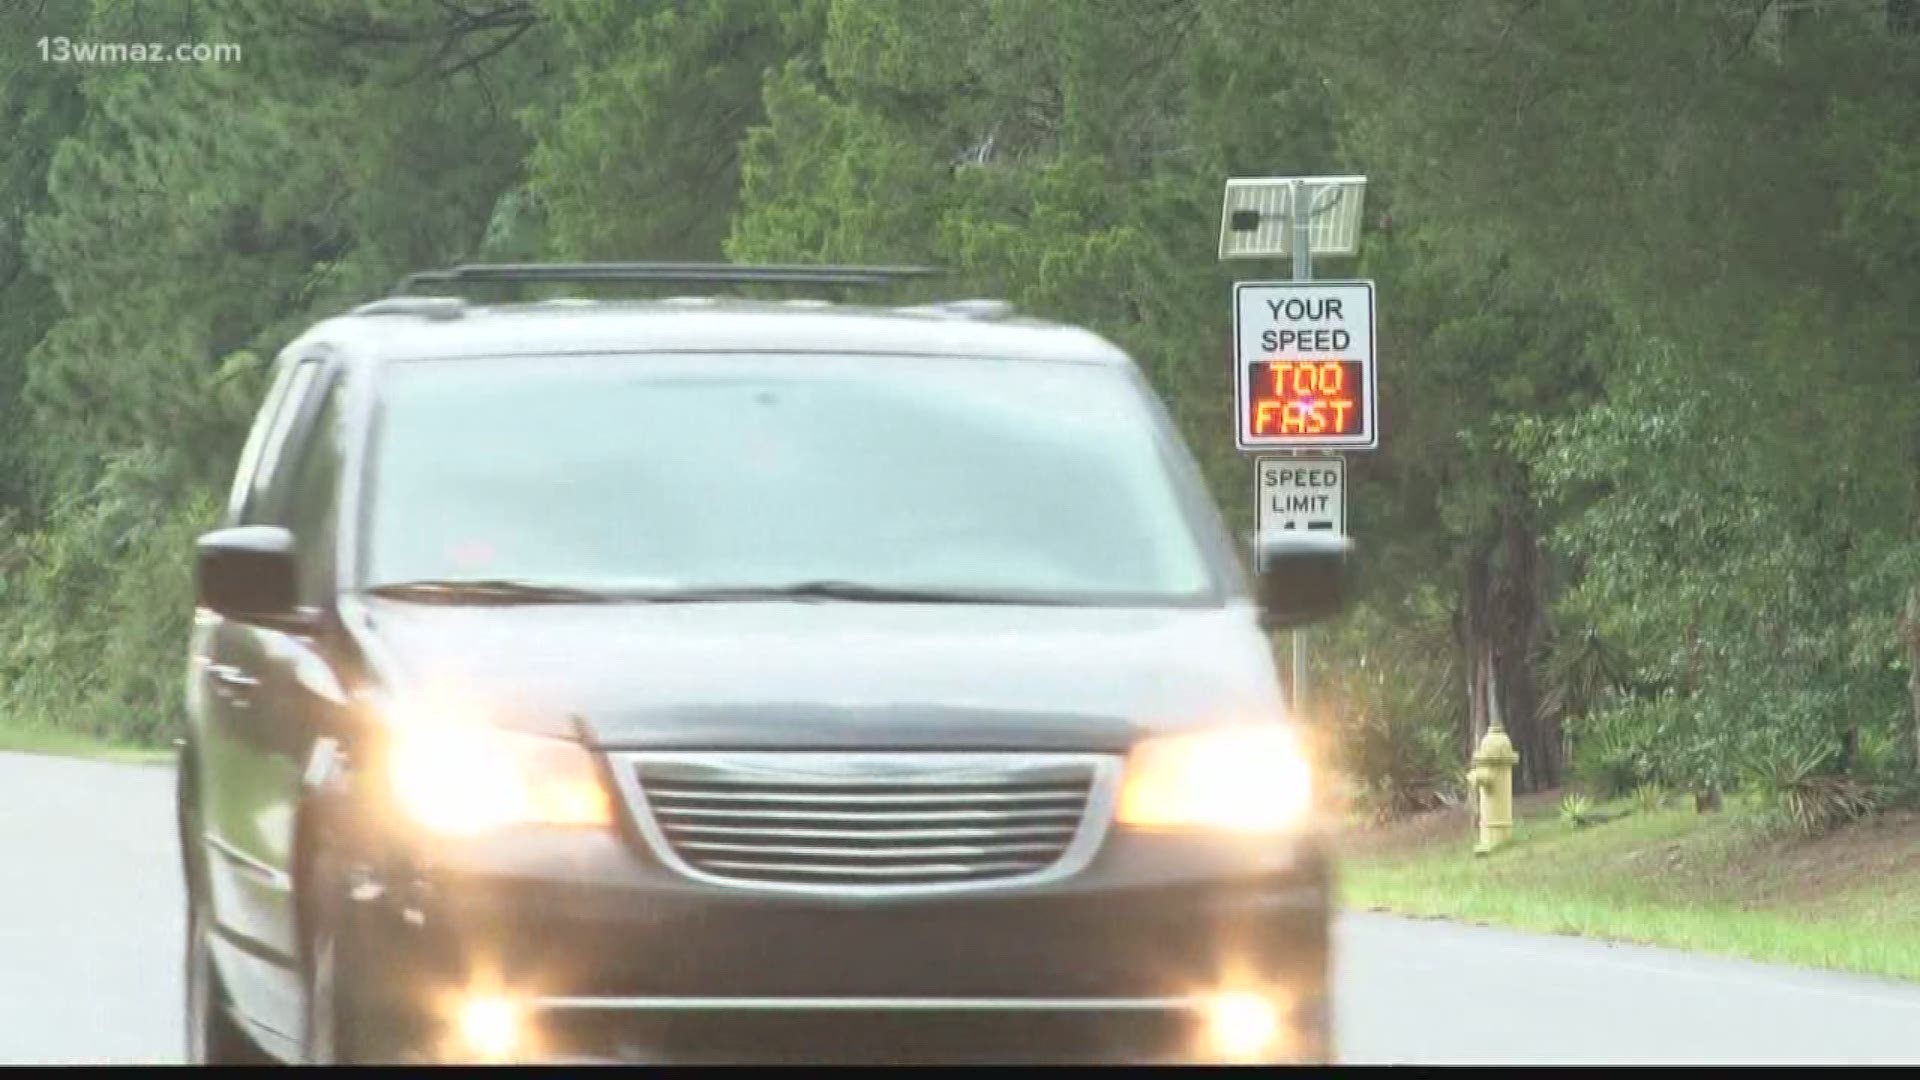 Baldwin County says drivers are barreling through an intersection near where children play and they're taking action to slow them down.